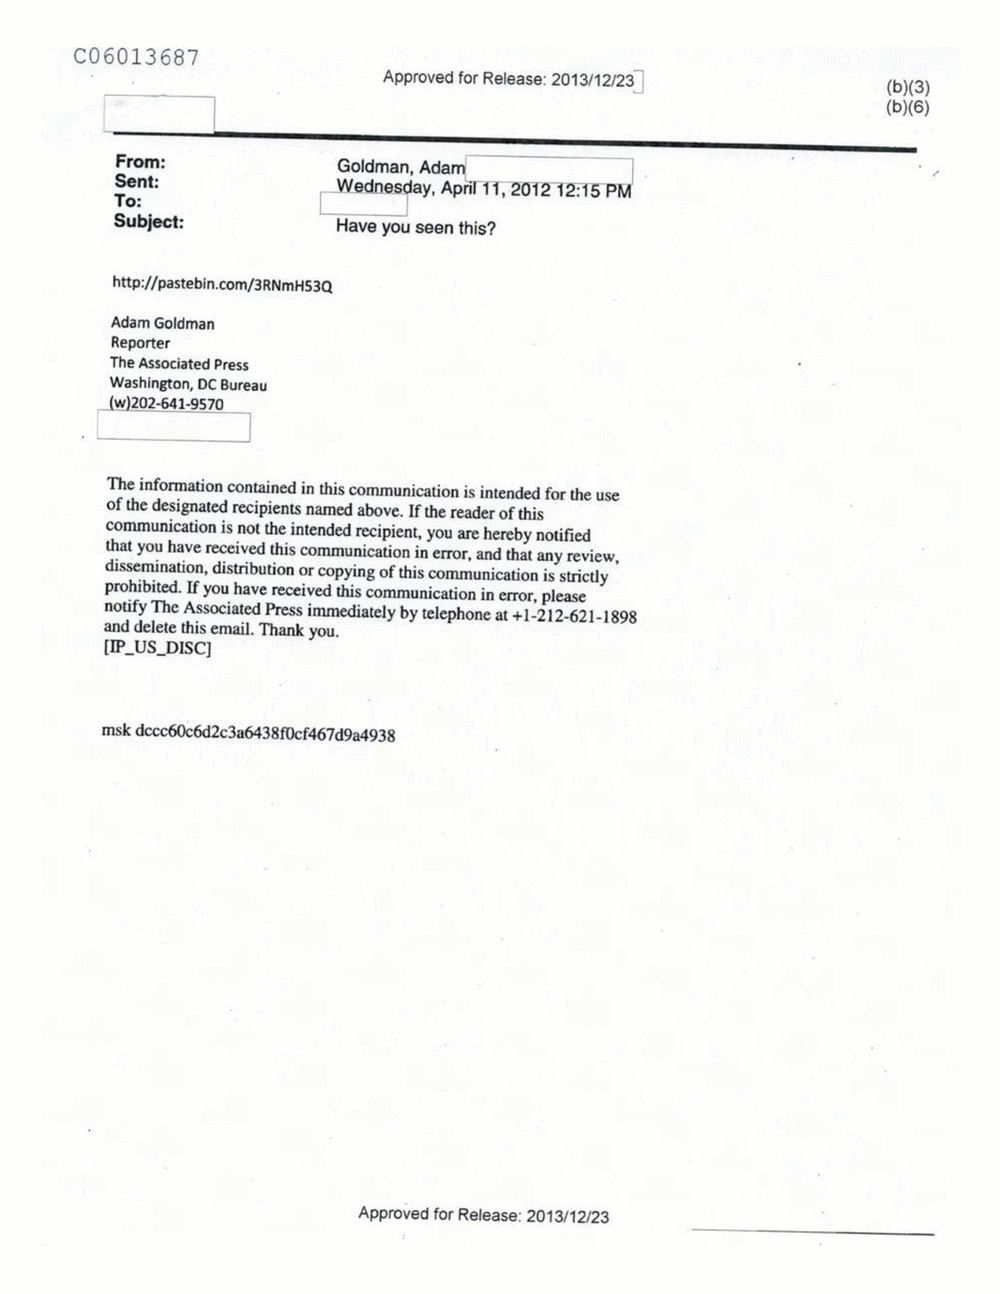 Page 544 from Email Correspondence Between Reporters and CIA Flacks